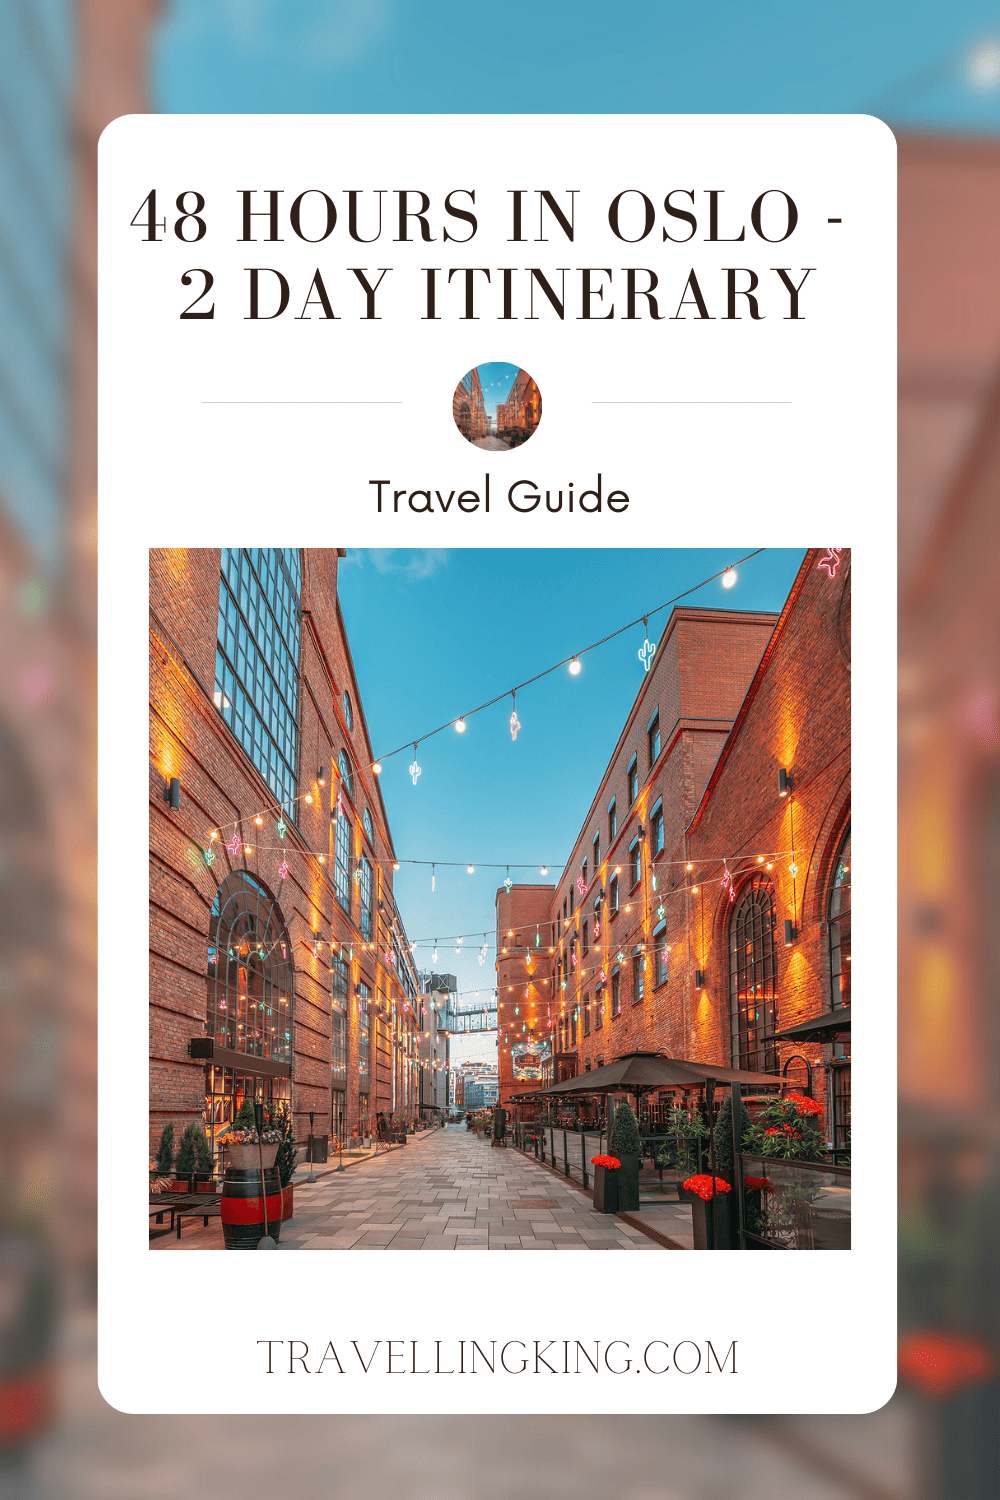 48 Hours in Oslo - 2 Day Itinerary